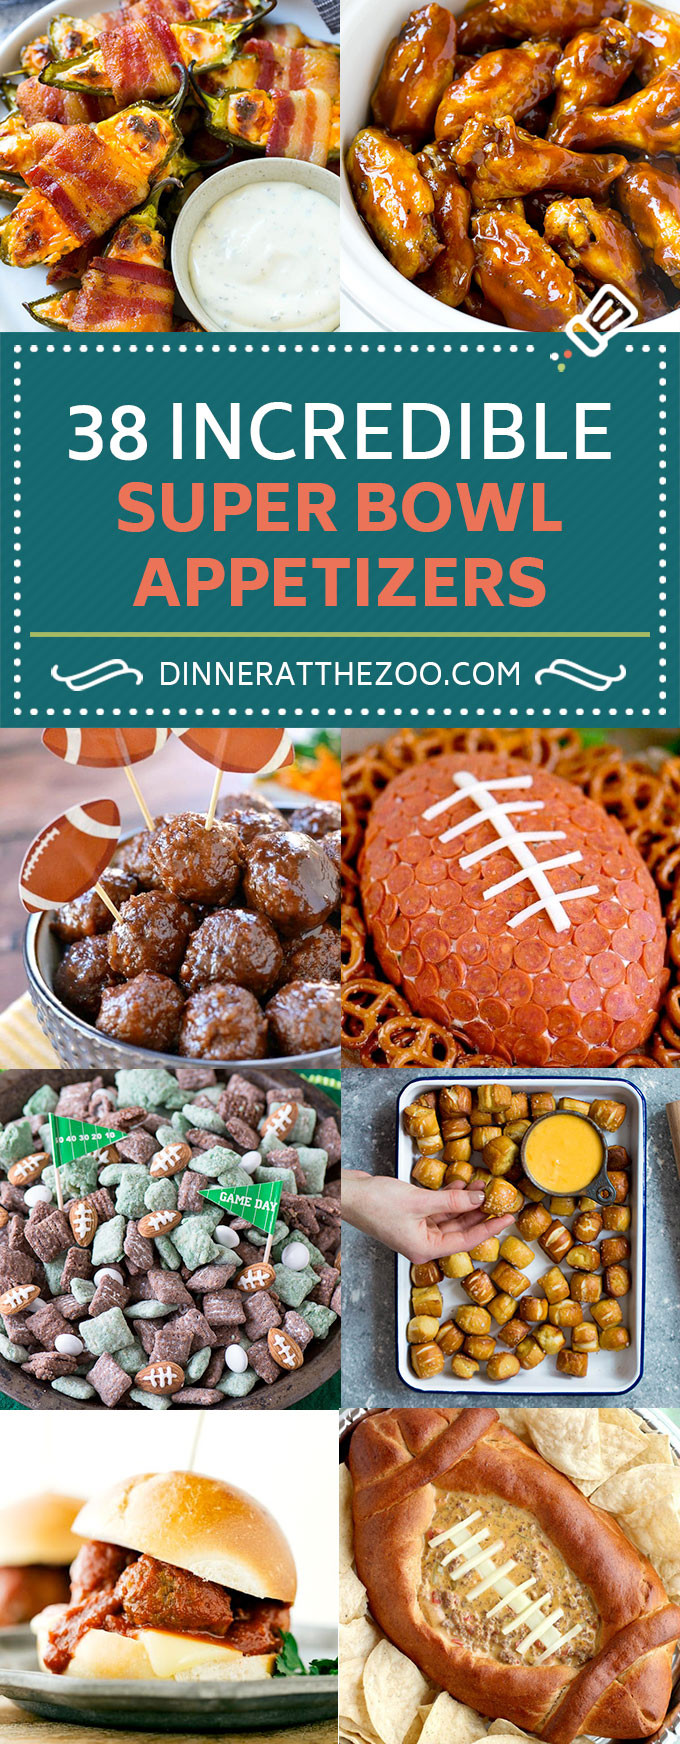 Super Bowl Snacks Recipe
 45 Incredible Super Bowl Appetizer Recipes Dinner at the Zoo